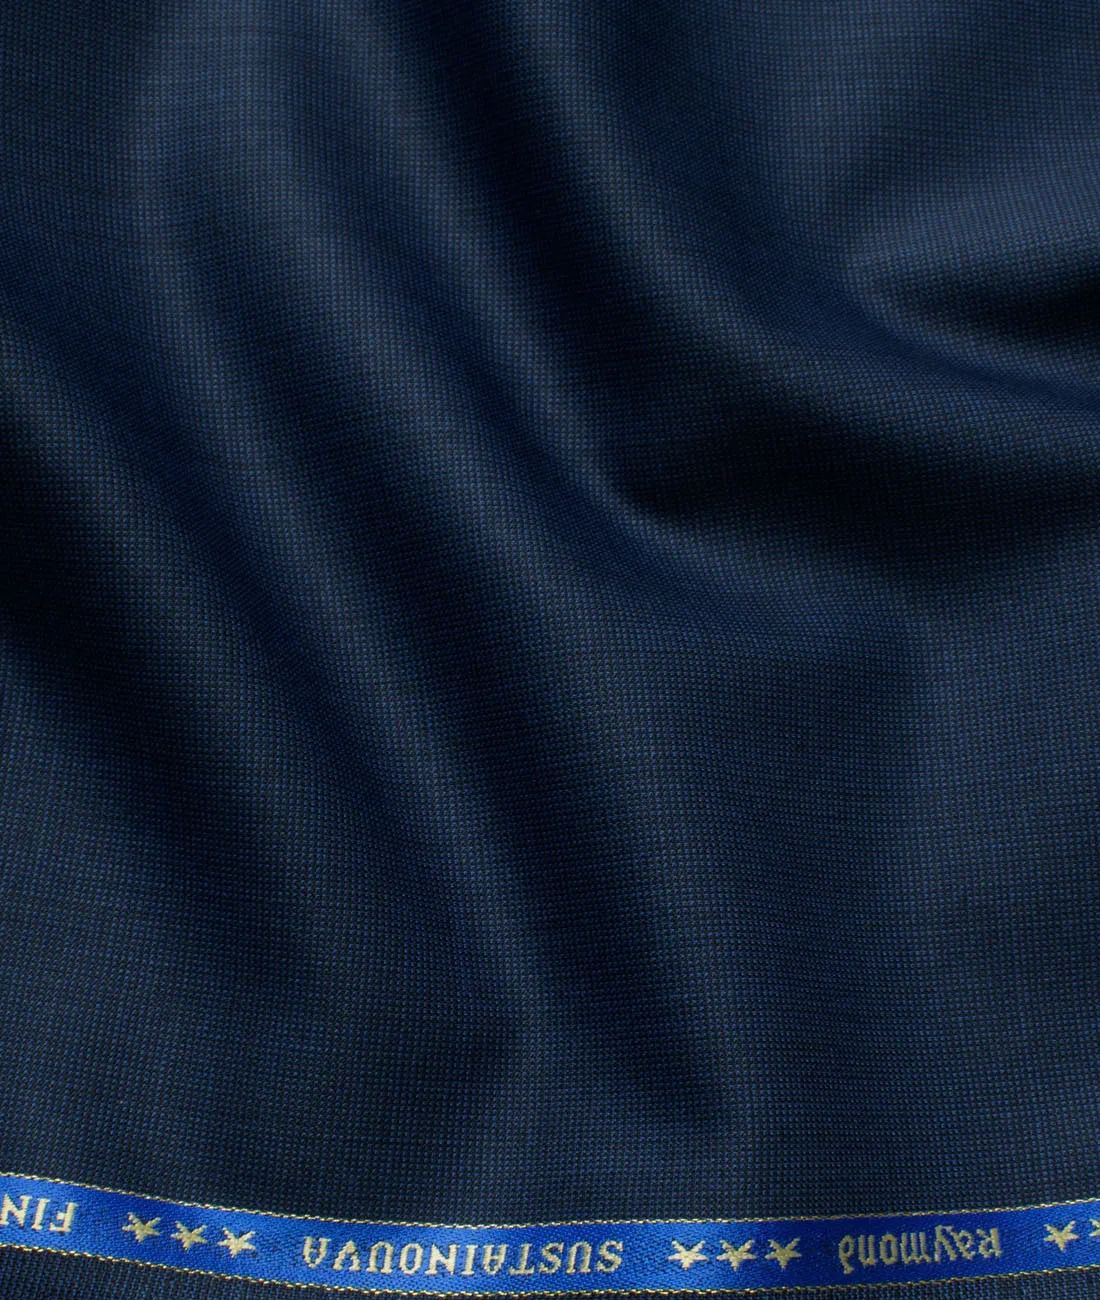 Wool Structured Super 100GÇÖs Unstitched Suiting Fabric (Dark Royal Blue) very fine and soft